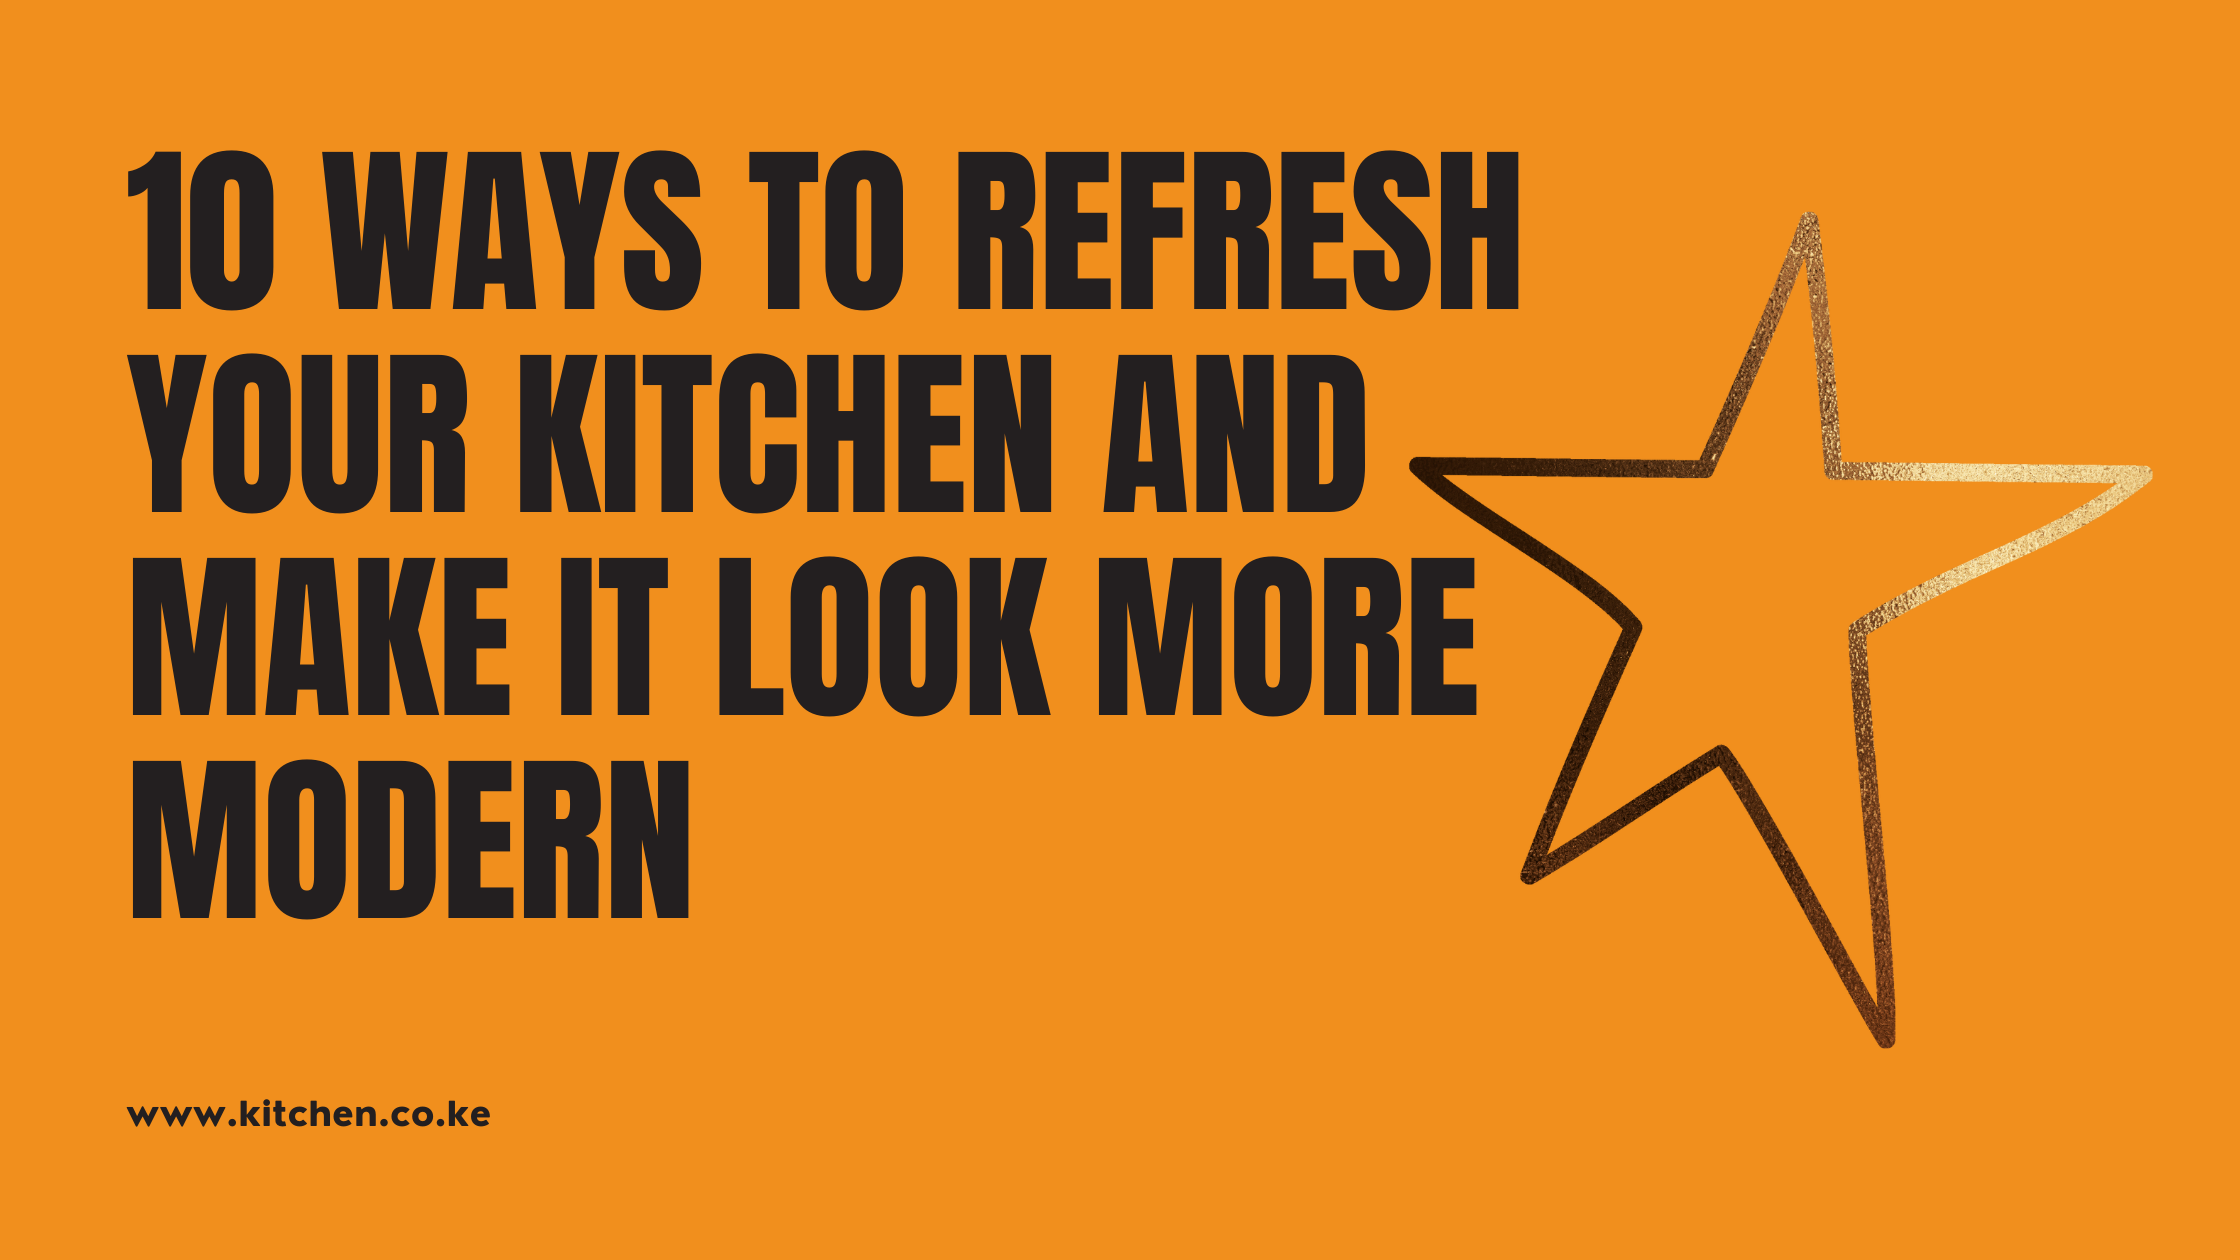 10 Ways to Refresh Your Kitchen in Kenya and Make It Look More Modern